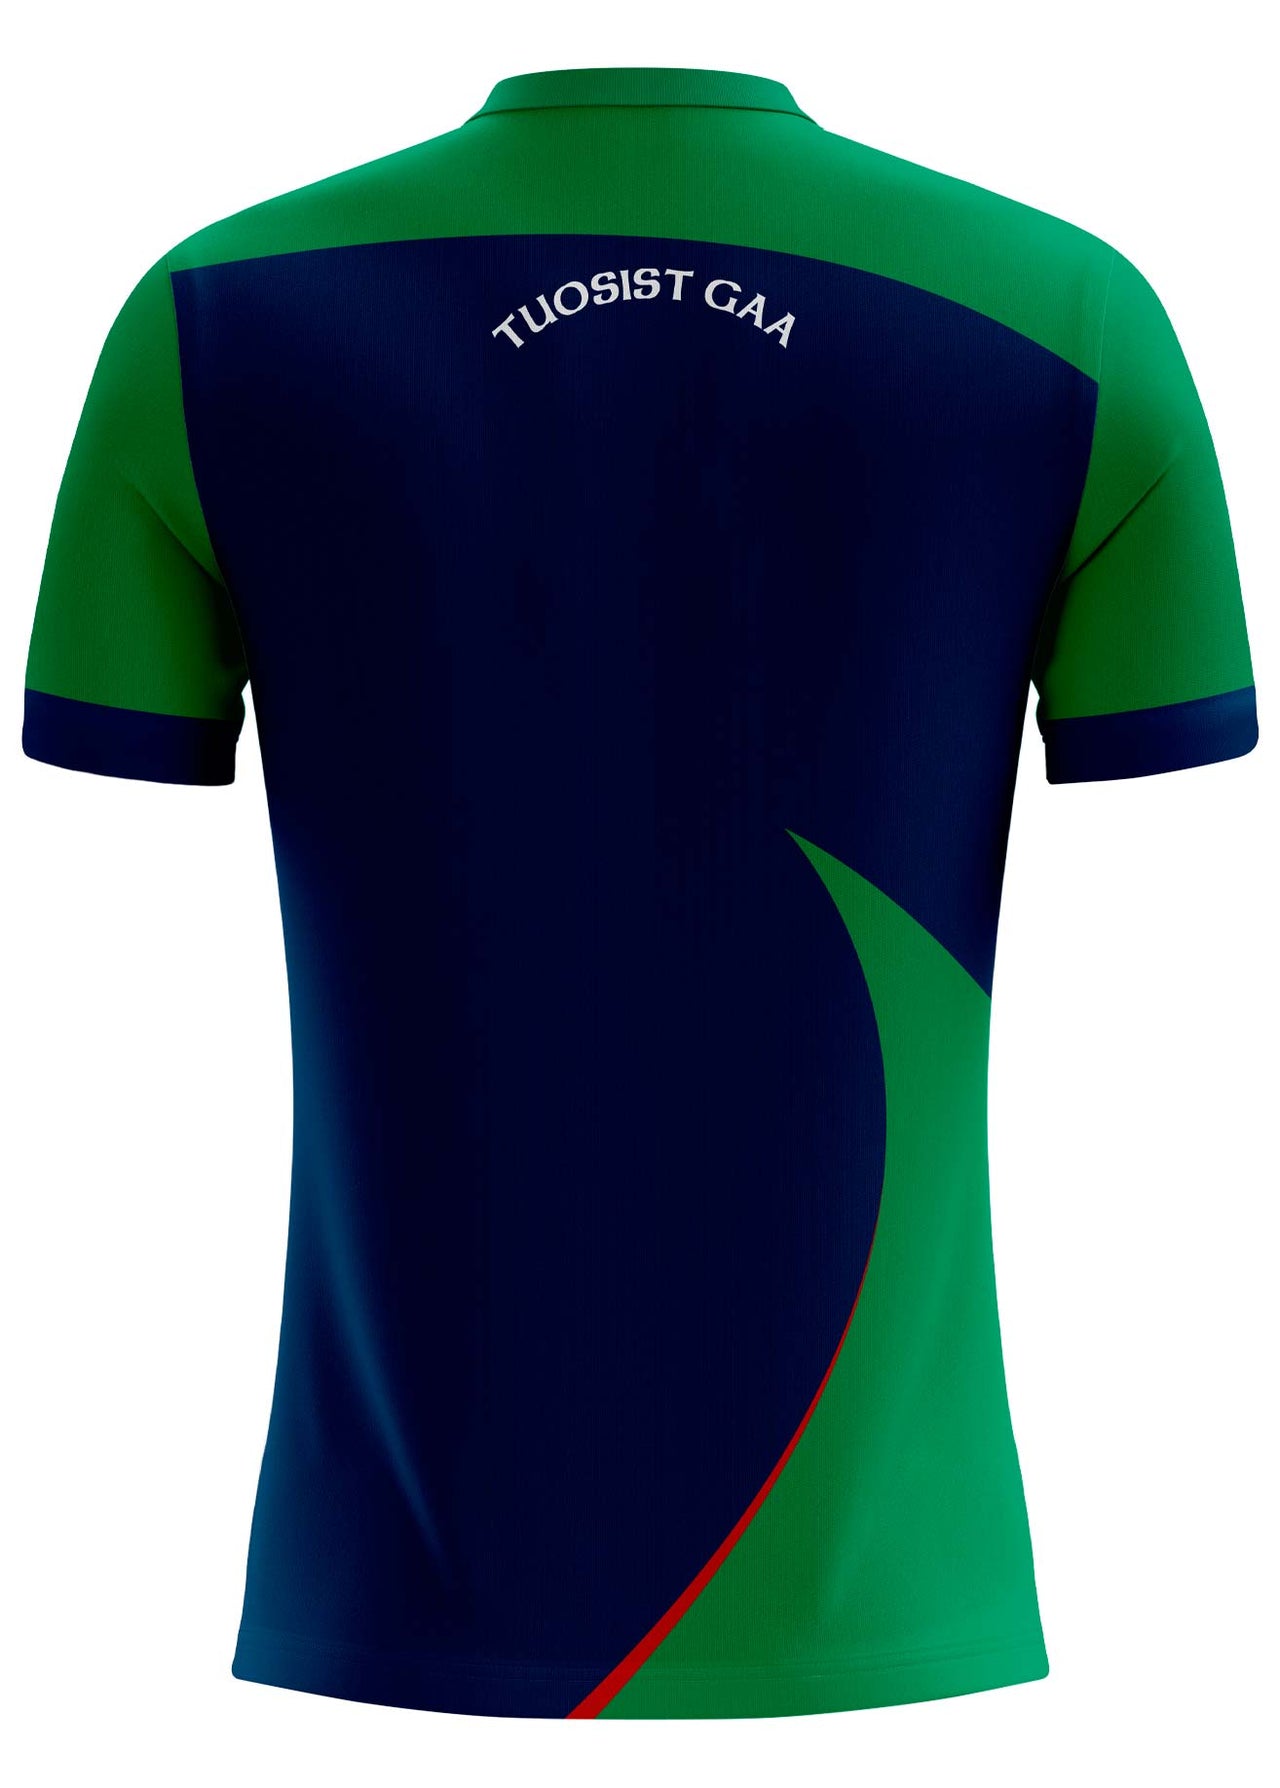 Tuosist GAA Training Jersey Player Fit Adult